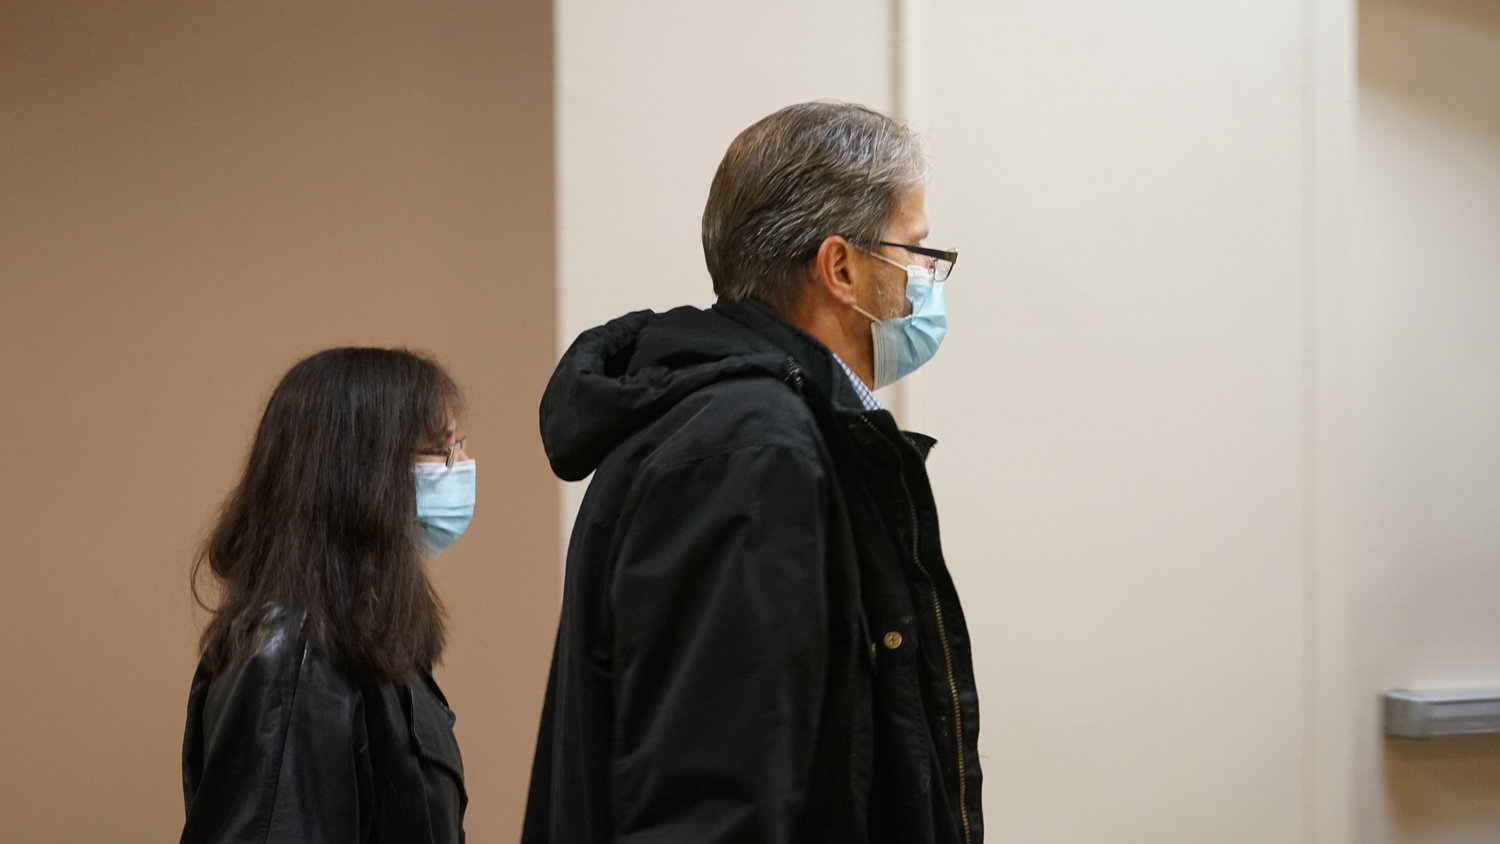 Valley Streamers Mindy Canarick and John McEneaney at the First District Courthouse, where they were re-arraigned on misdemeanor charges Friday.